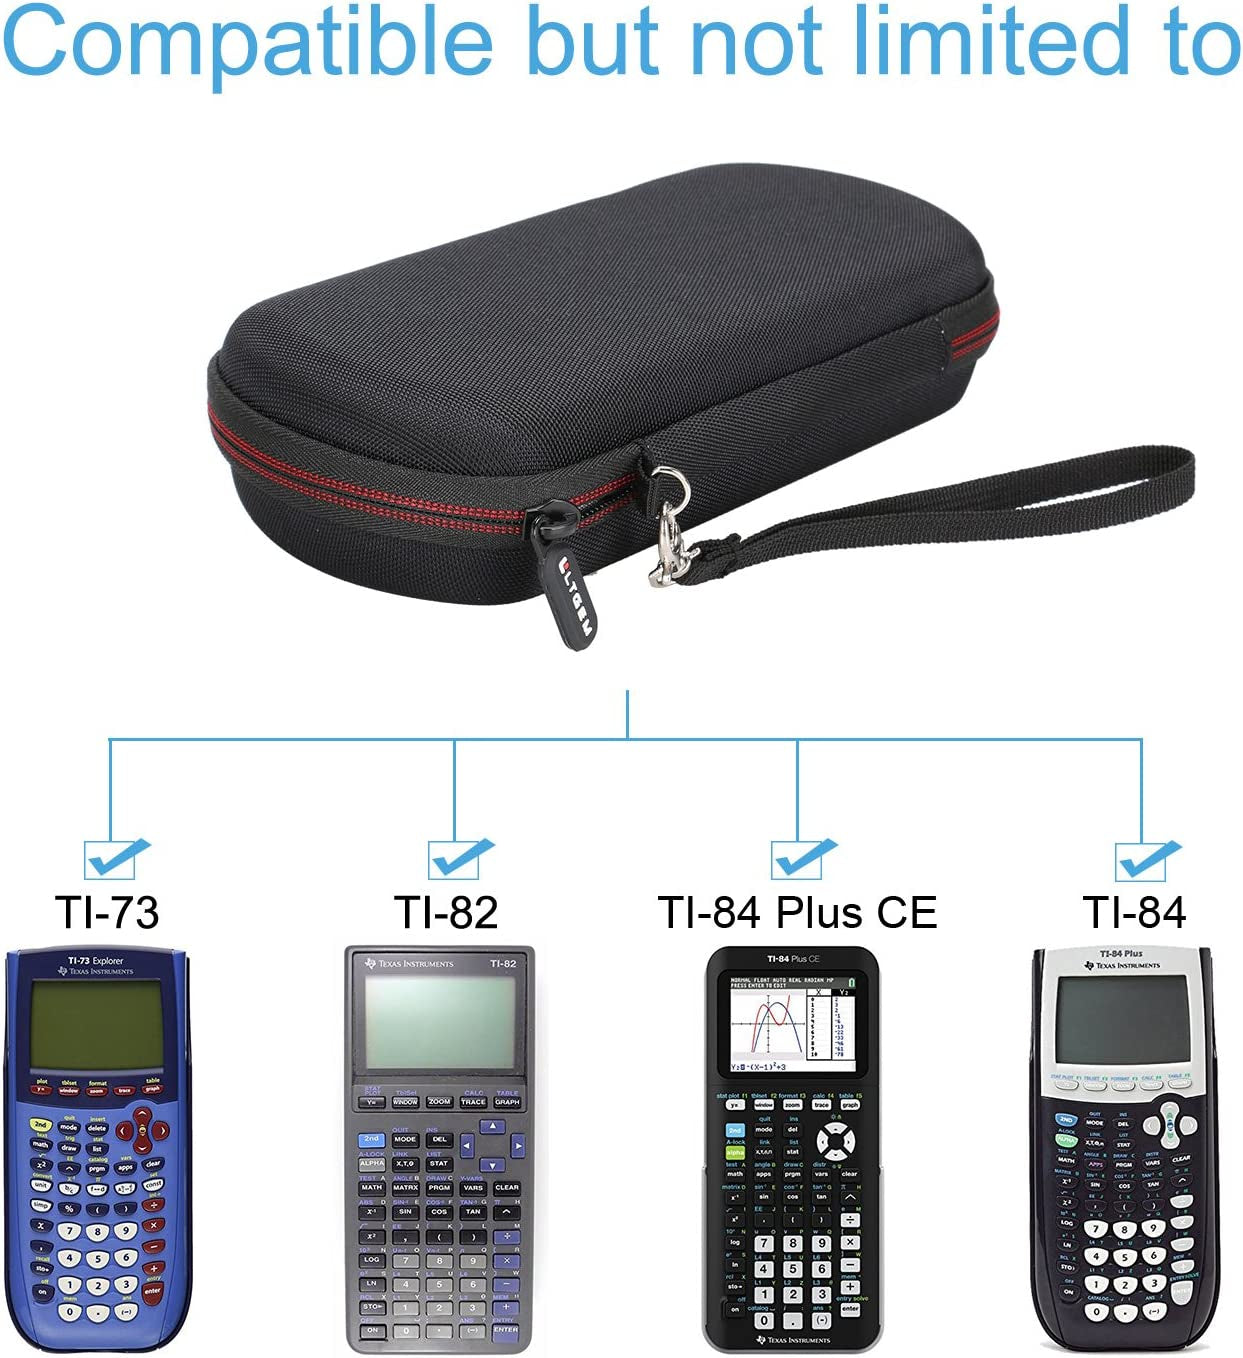 Case for Texas Instruments TI-84, 89/83 / Plus/Ce Graphics Calculator-Includes Mesh Pocket.(Hard and Black)